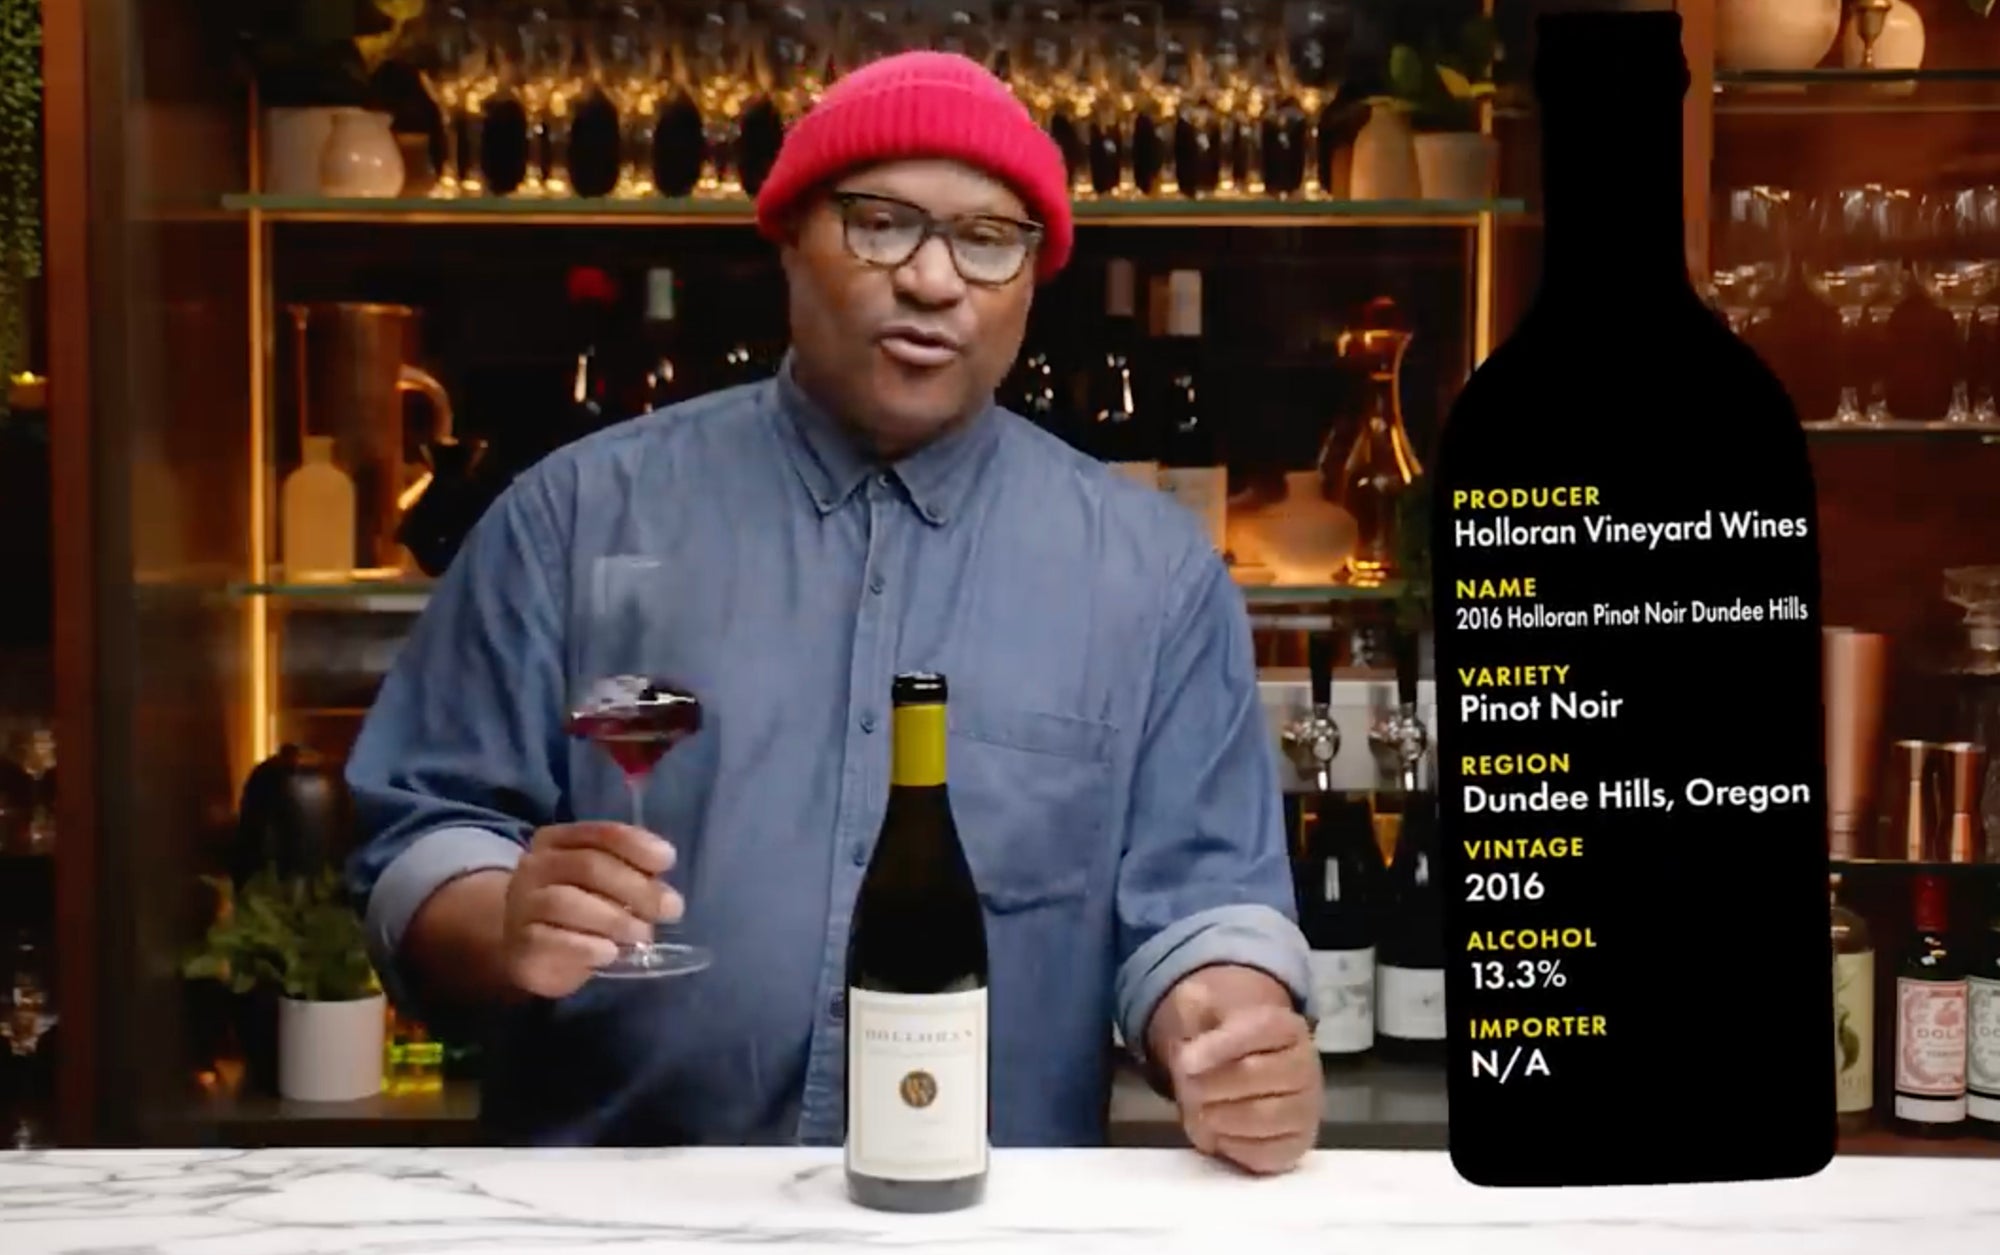 Bon Appétit YouTube Channel "World of Wine" Features Holloran Wine